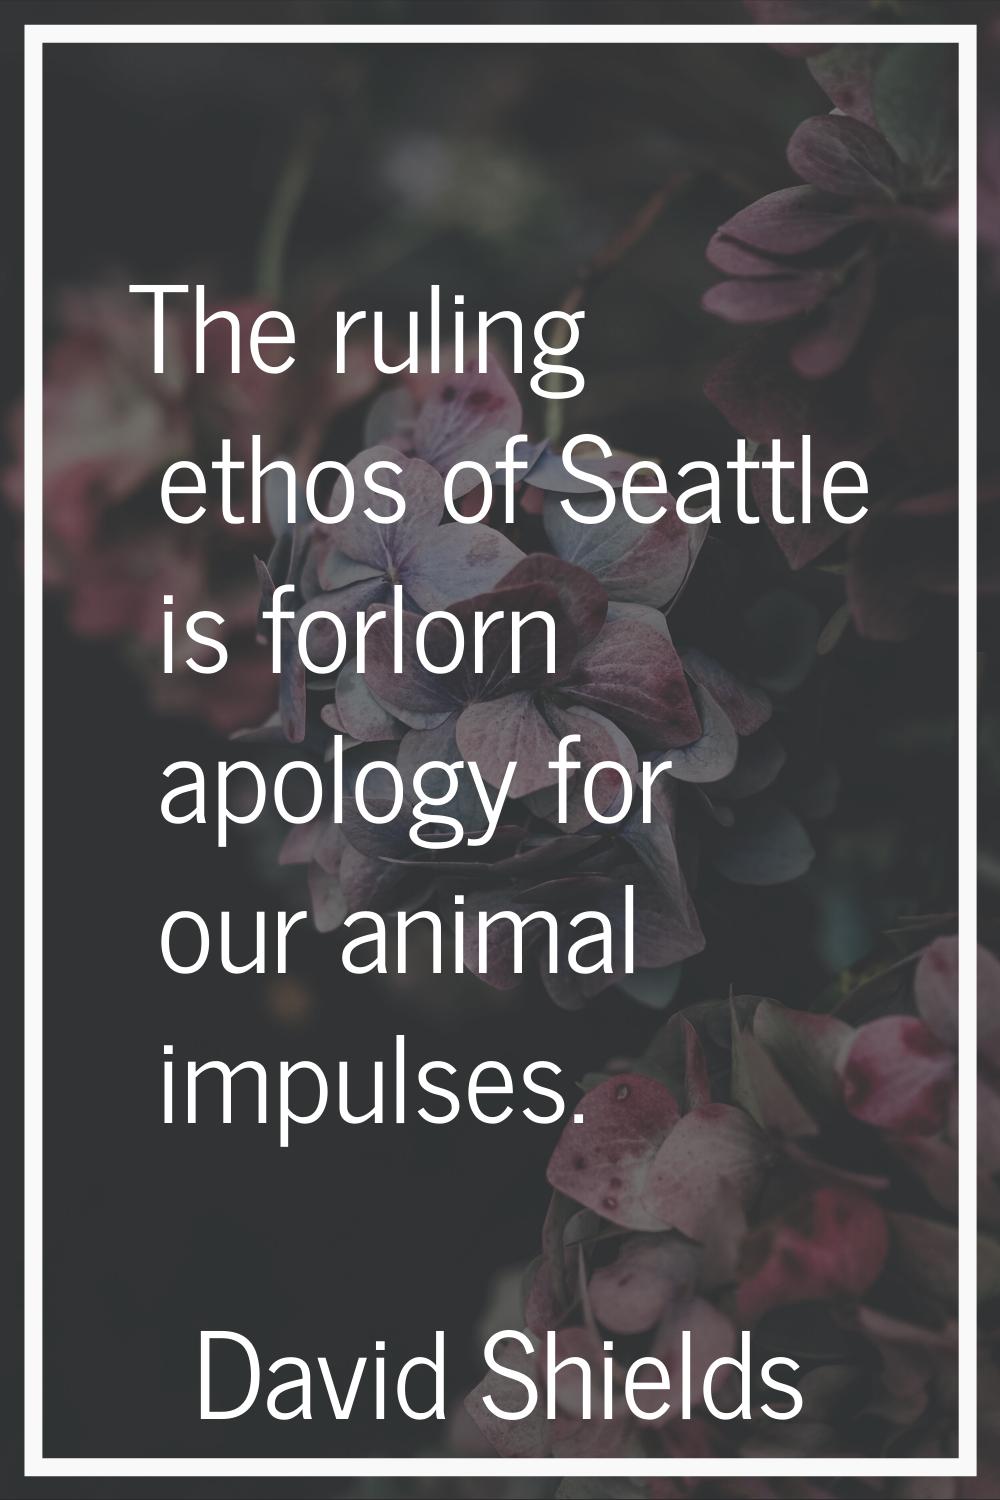 The ruling ethos of Seattle is forlorn apology for our animal impulses.